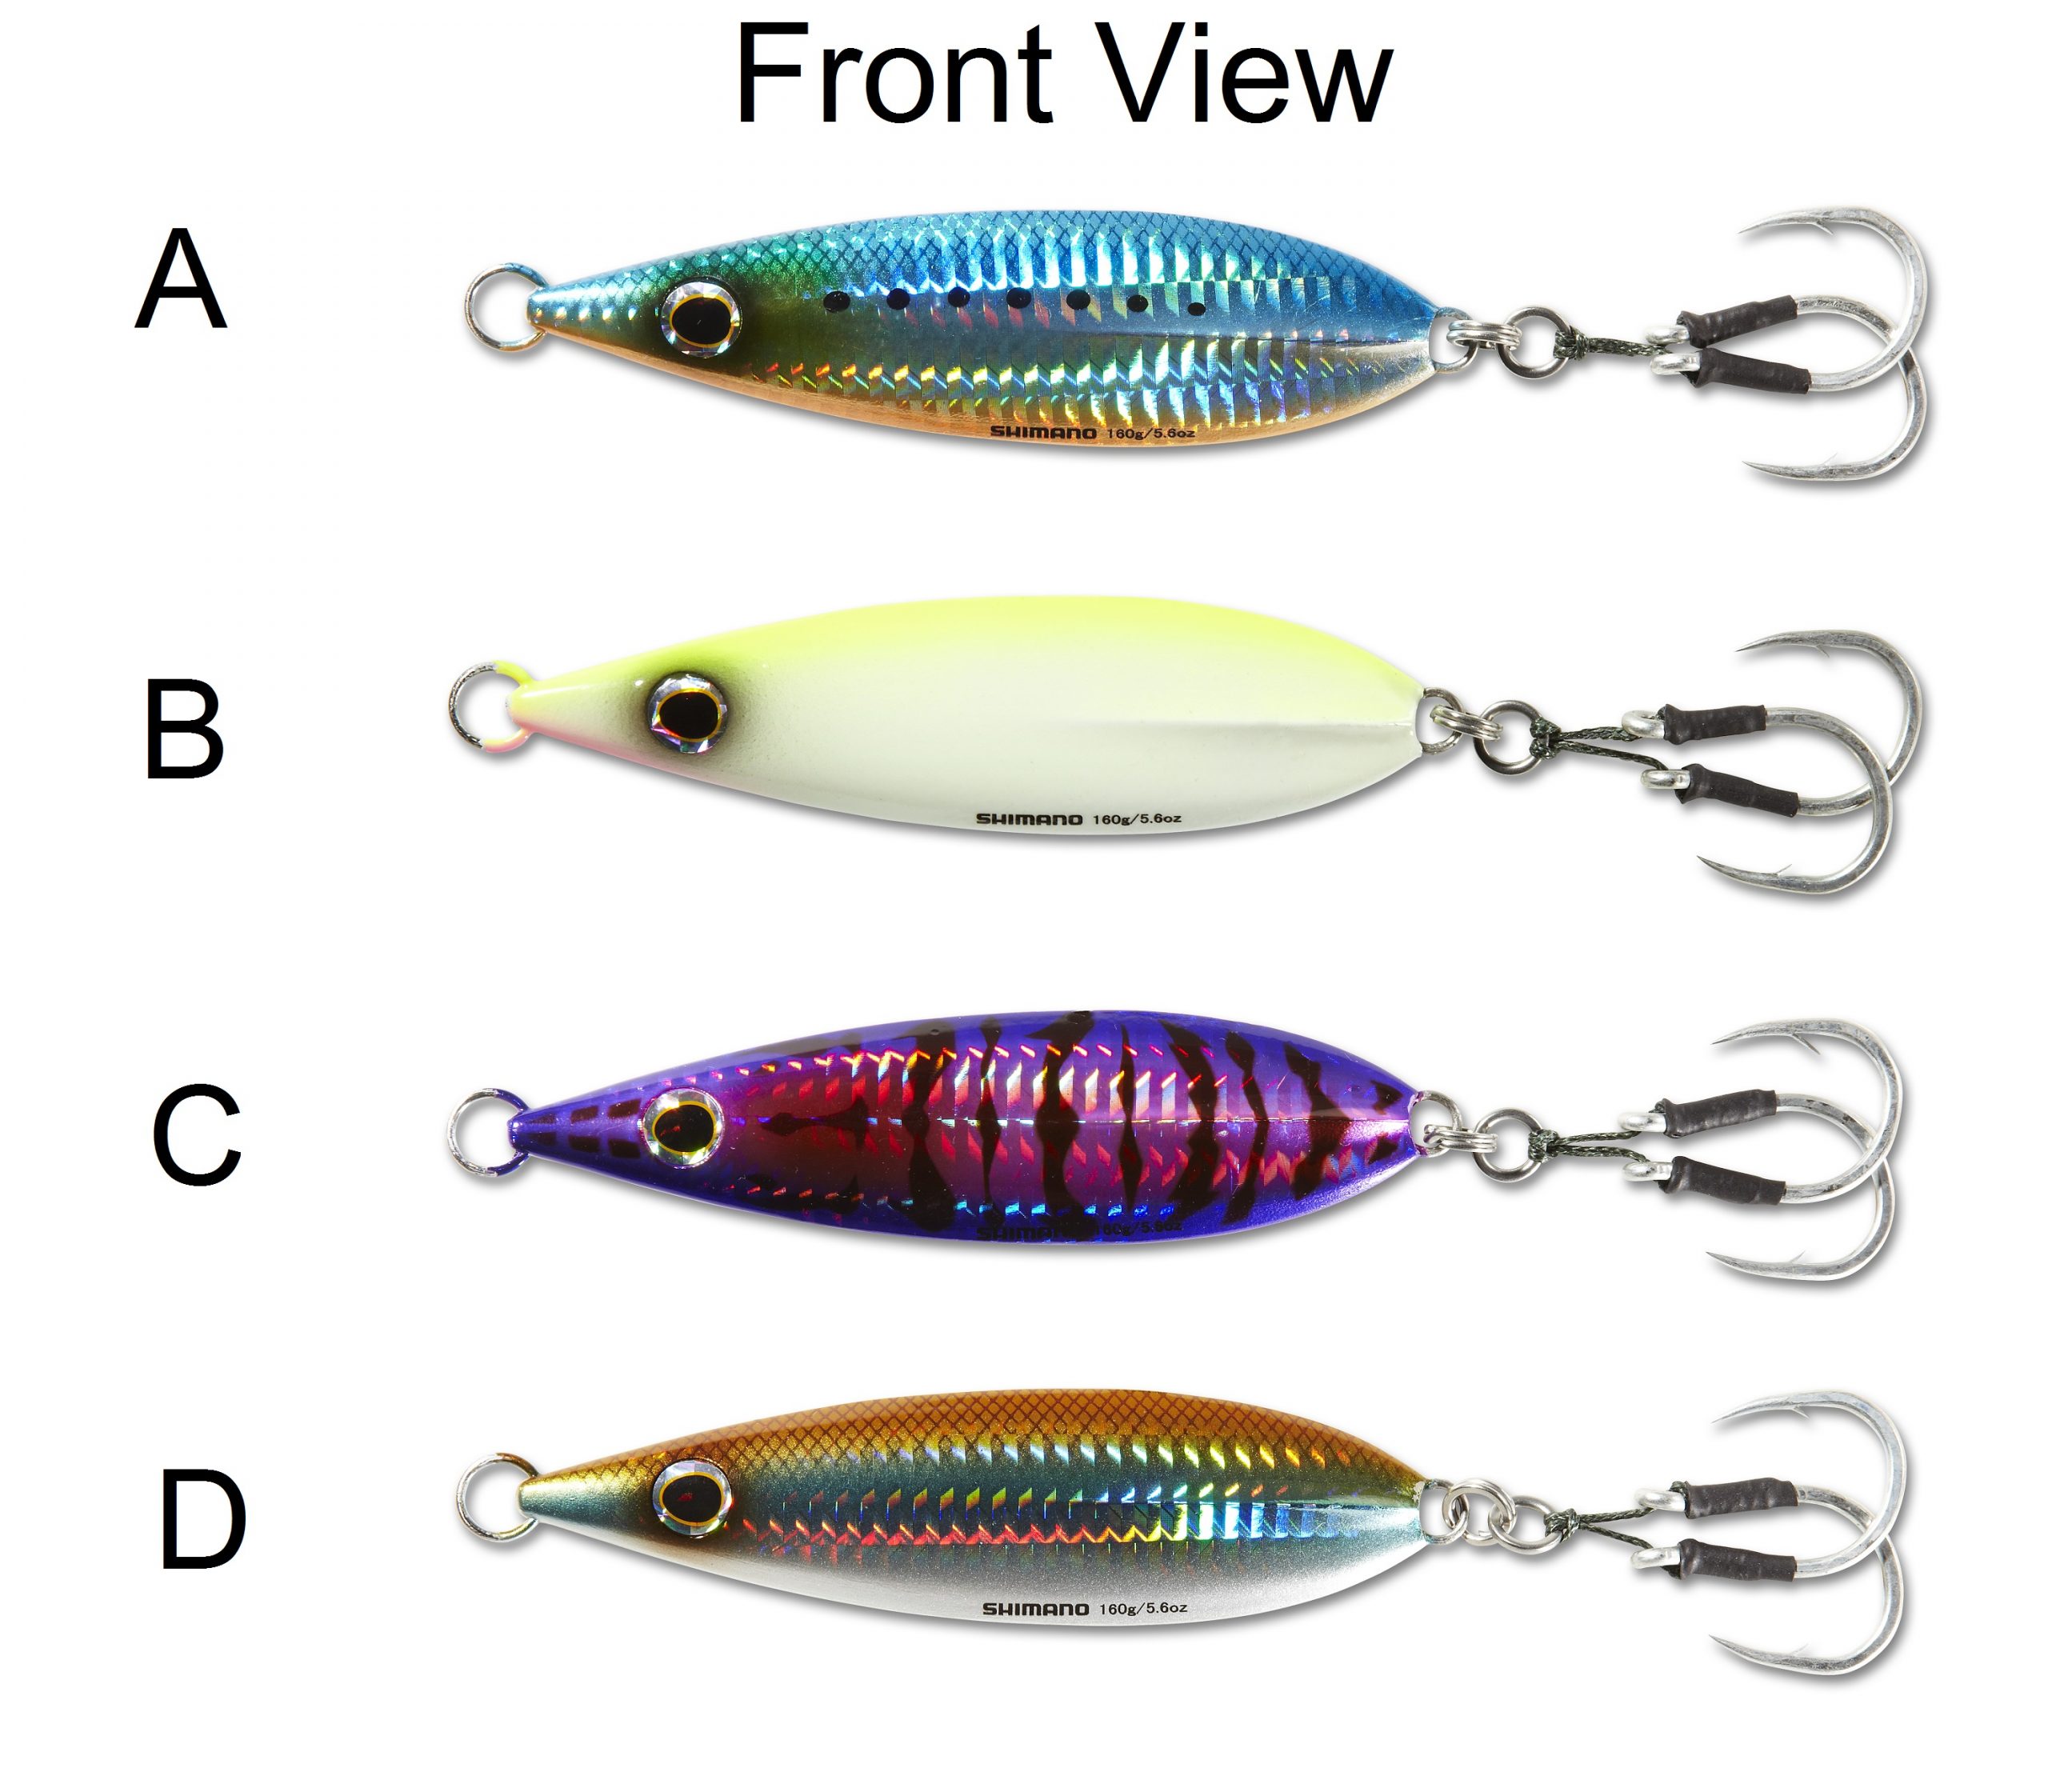 Qty 2 Speed Jigs 3.5oz/100g Orange Vertical Butterfly Saltwater Fishing Lures 